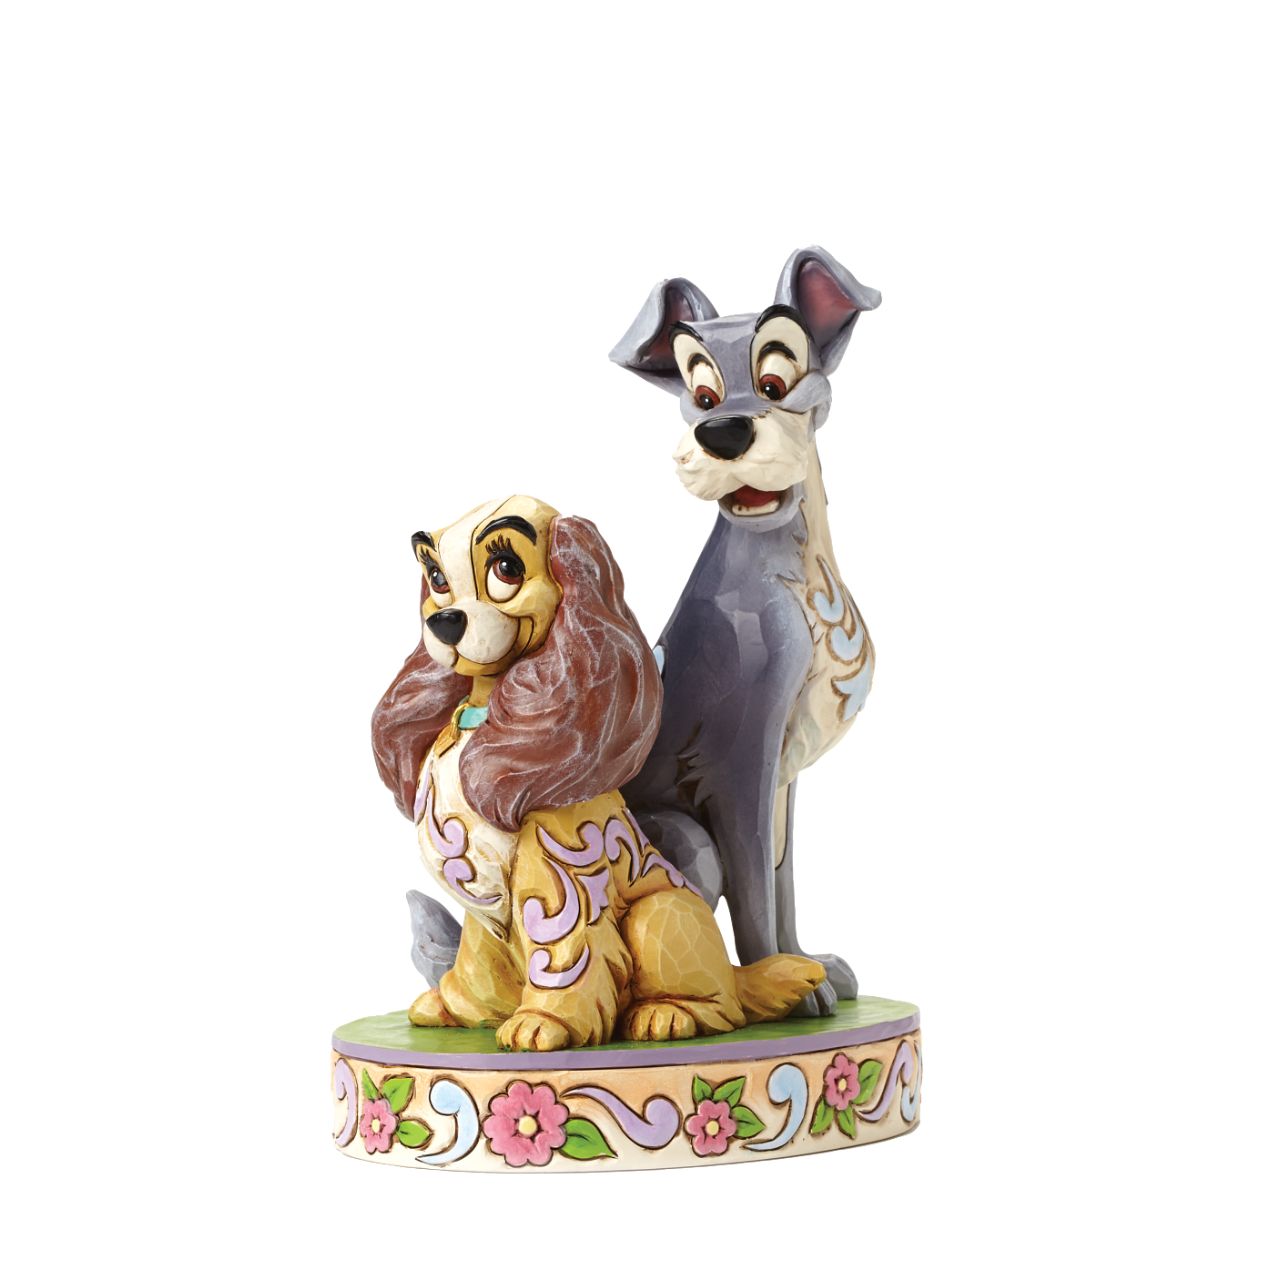 Opposites Attract Lady and The Tramp 60th Anniversary Piece  To celebrate the 60th Anniversary of Disney's romantic classic Lady and the Tramp. Jim Shore celebrates this historic milestone with a special figurine capturing the two characters in a lovable pose.